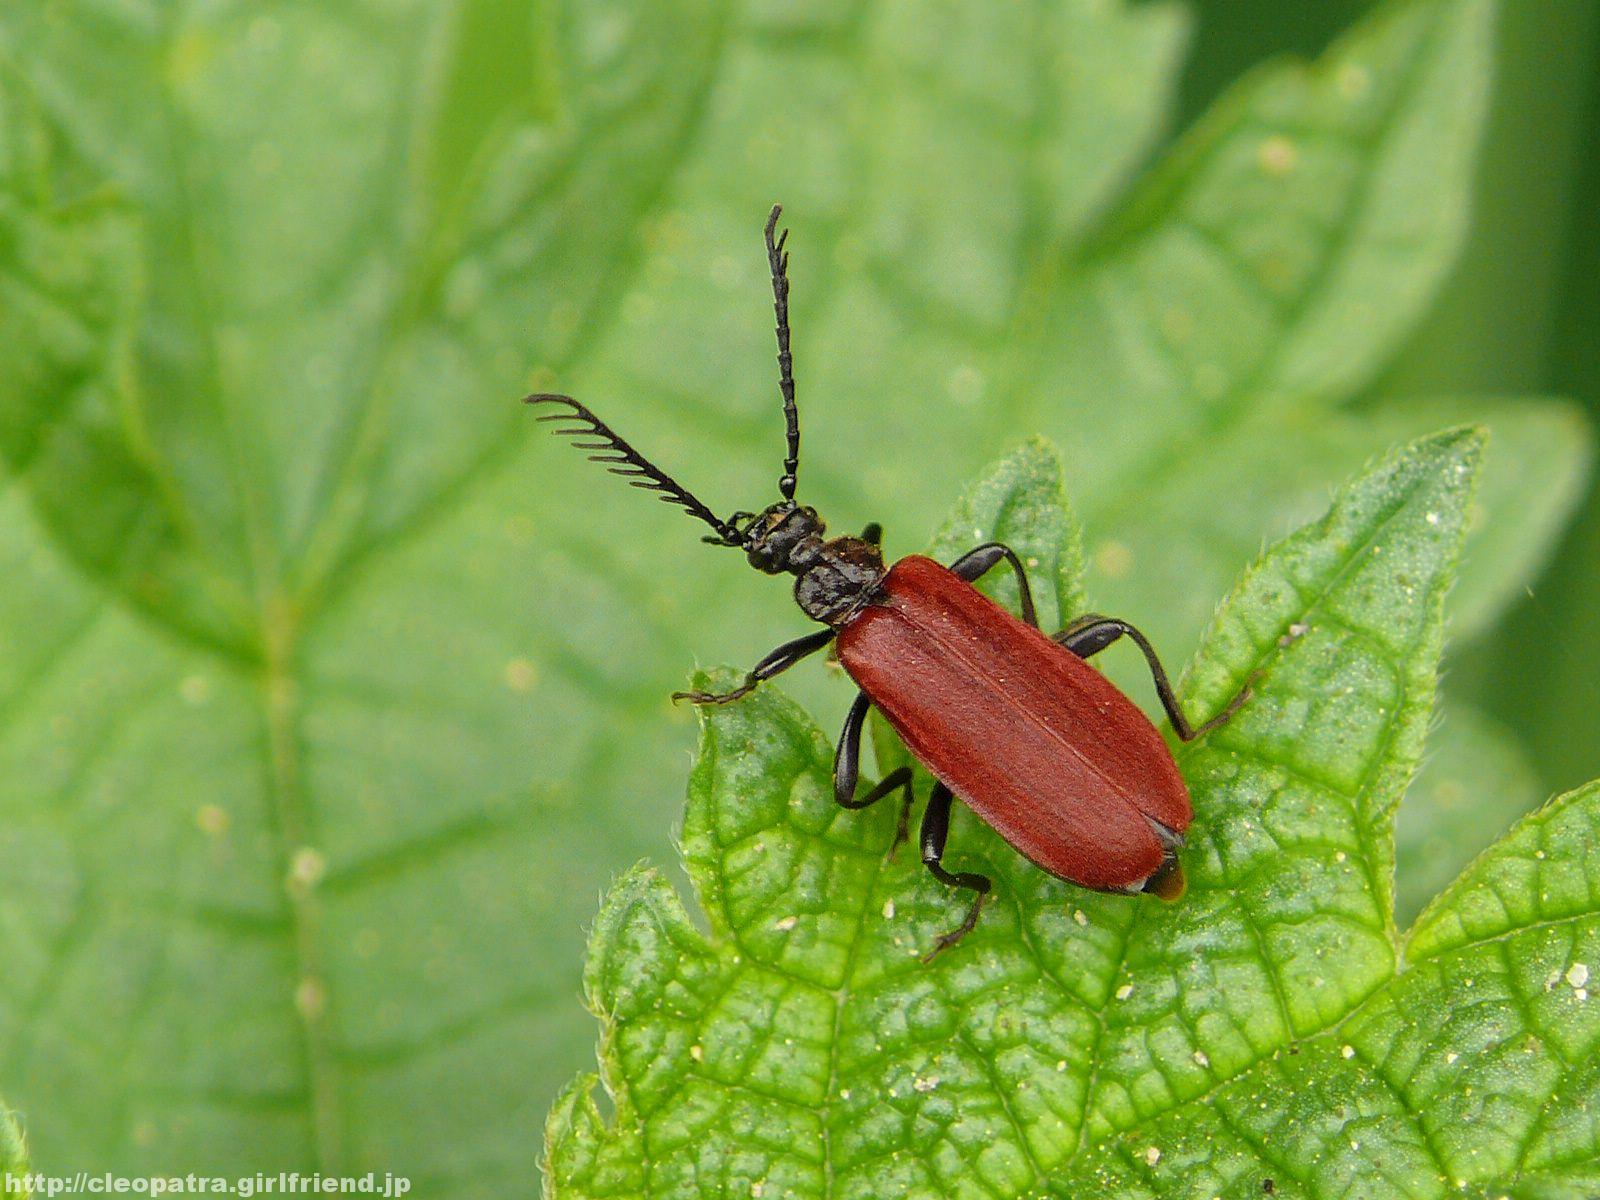 Cardinal Beetle ヒメアカハネムシみたいな感じの赤い虫 3305s Insects Nature